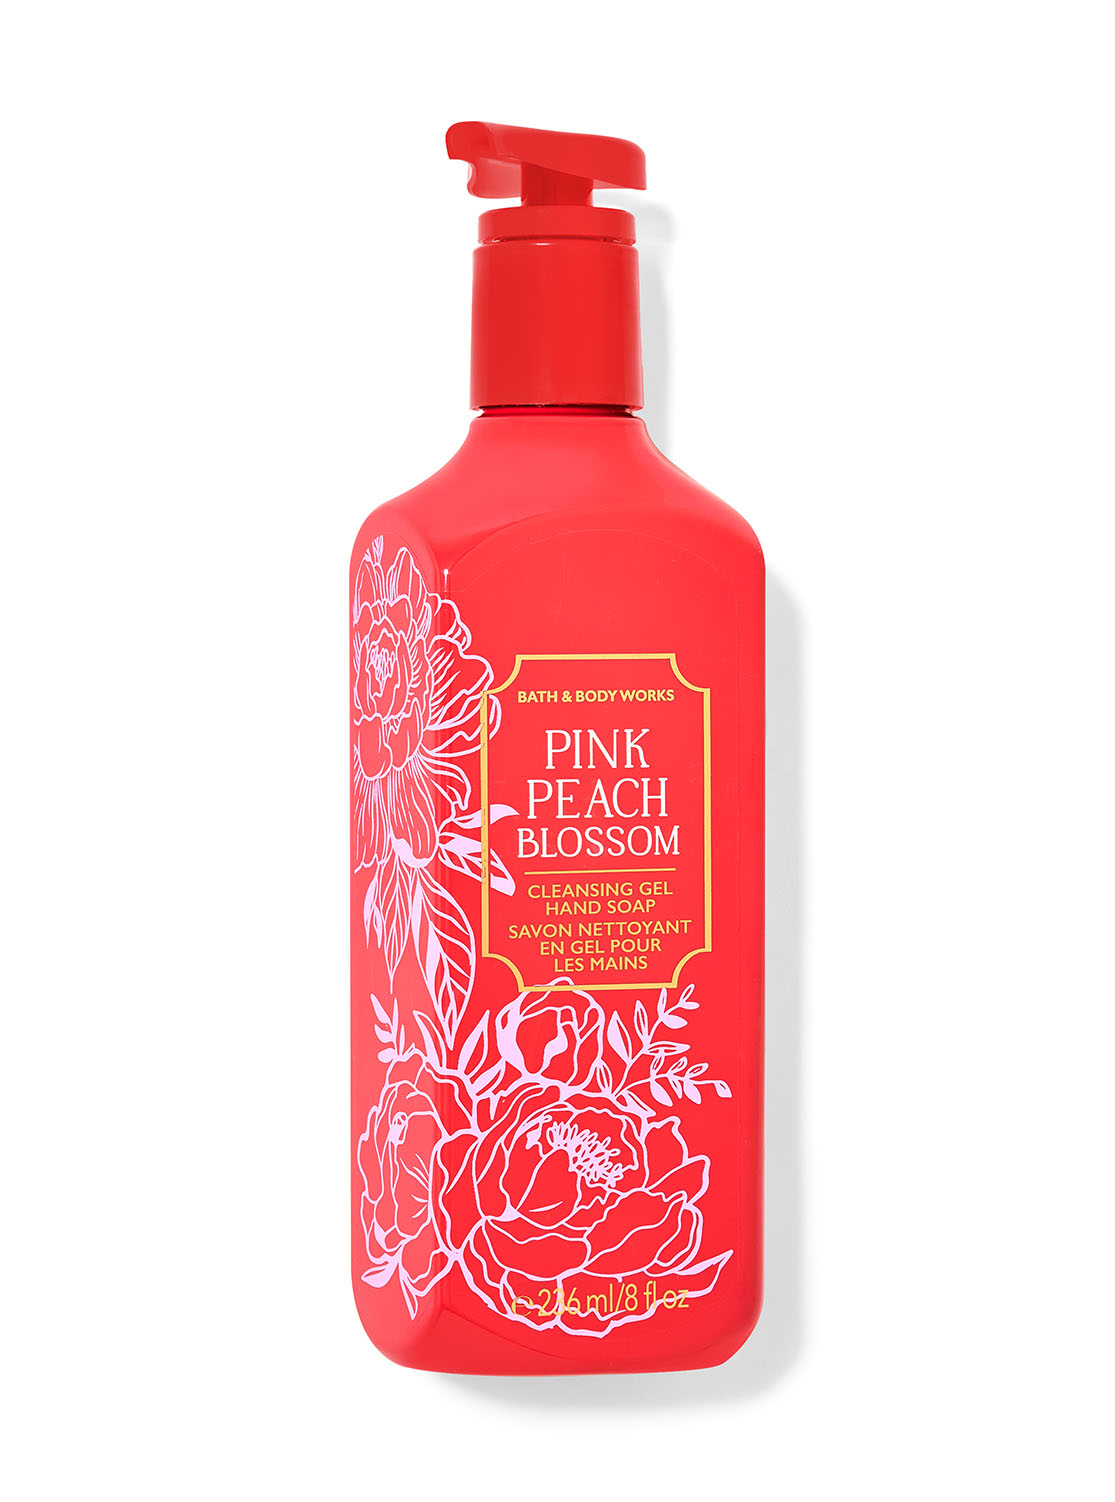 Pink Peach Blossom Cleansing Gel Hand Soap